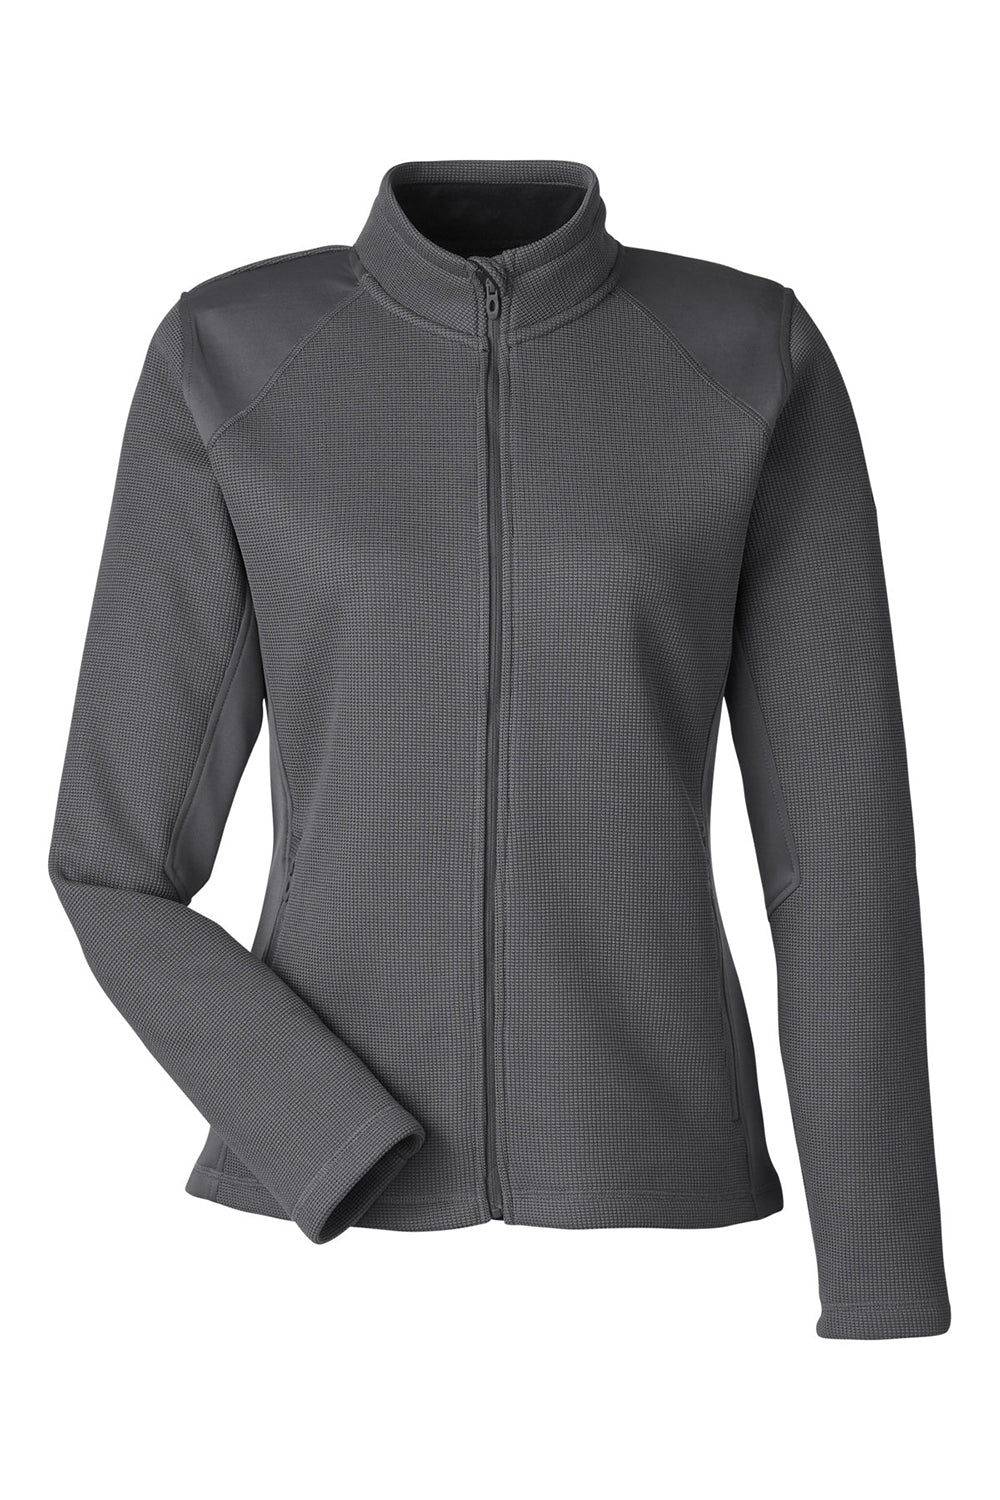 Spyder S17937 Womens Constant Canyon Full Zip Sweater Jacket Polar Grey Flat Front